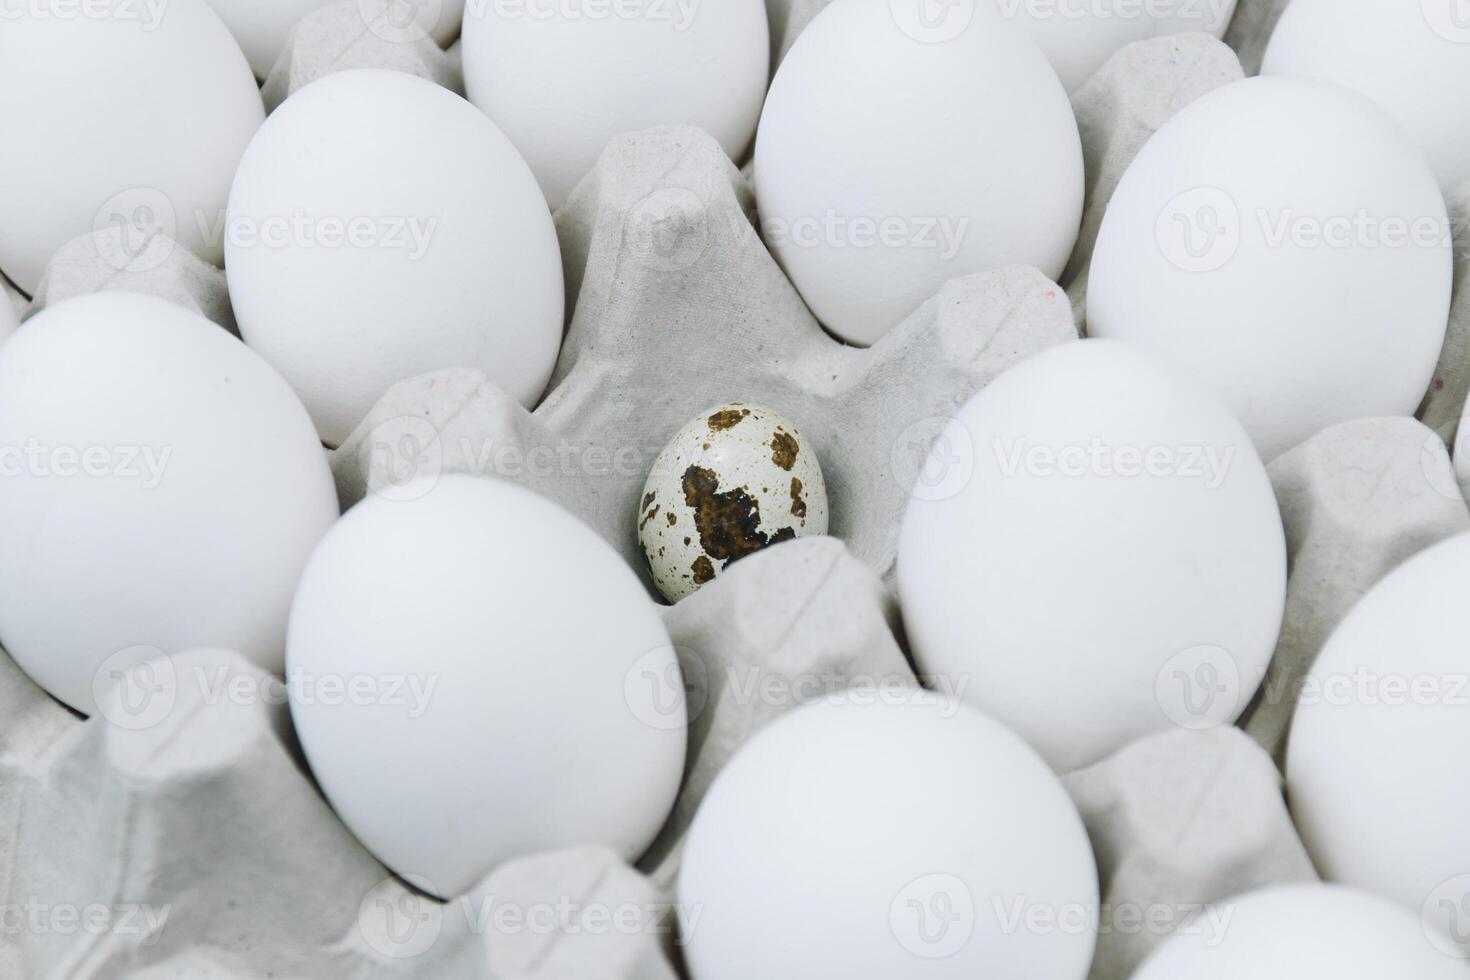 White raw chicken eggs and alone quail egg in a tray side view photo